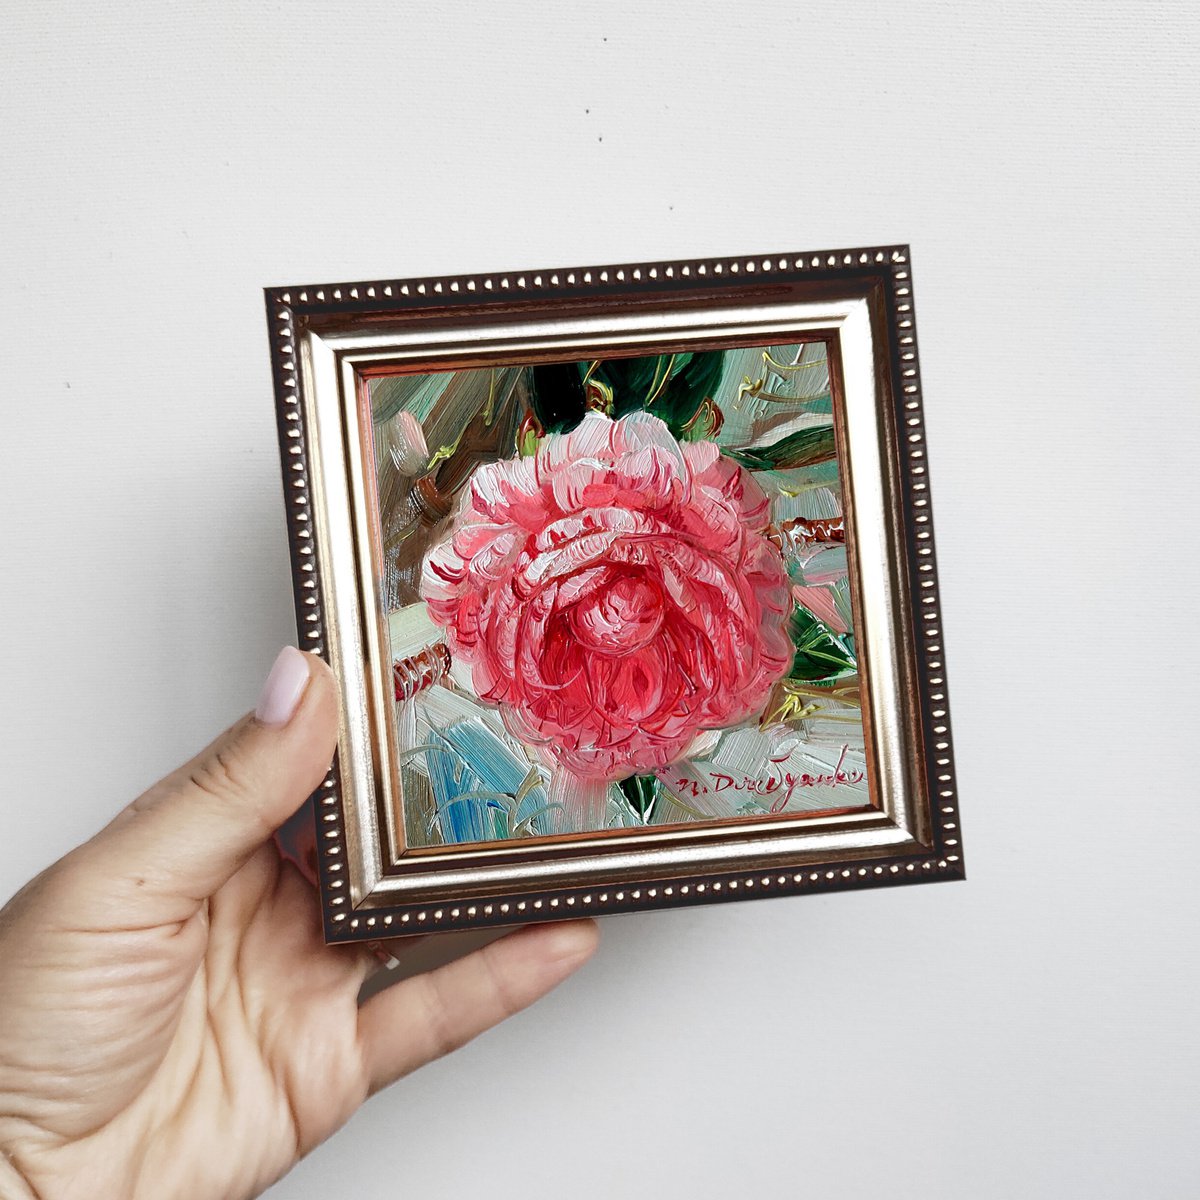 Camellia original oil painting framed, Small painting pink flowers, Unique camellia wall a... by Nataly Derevyanko